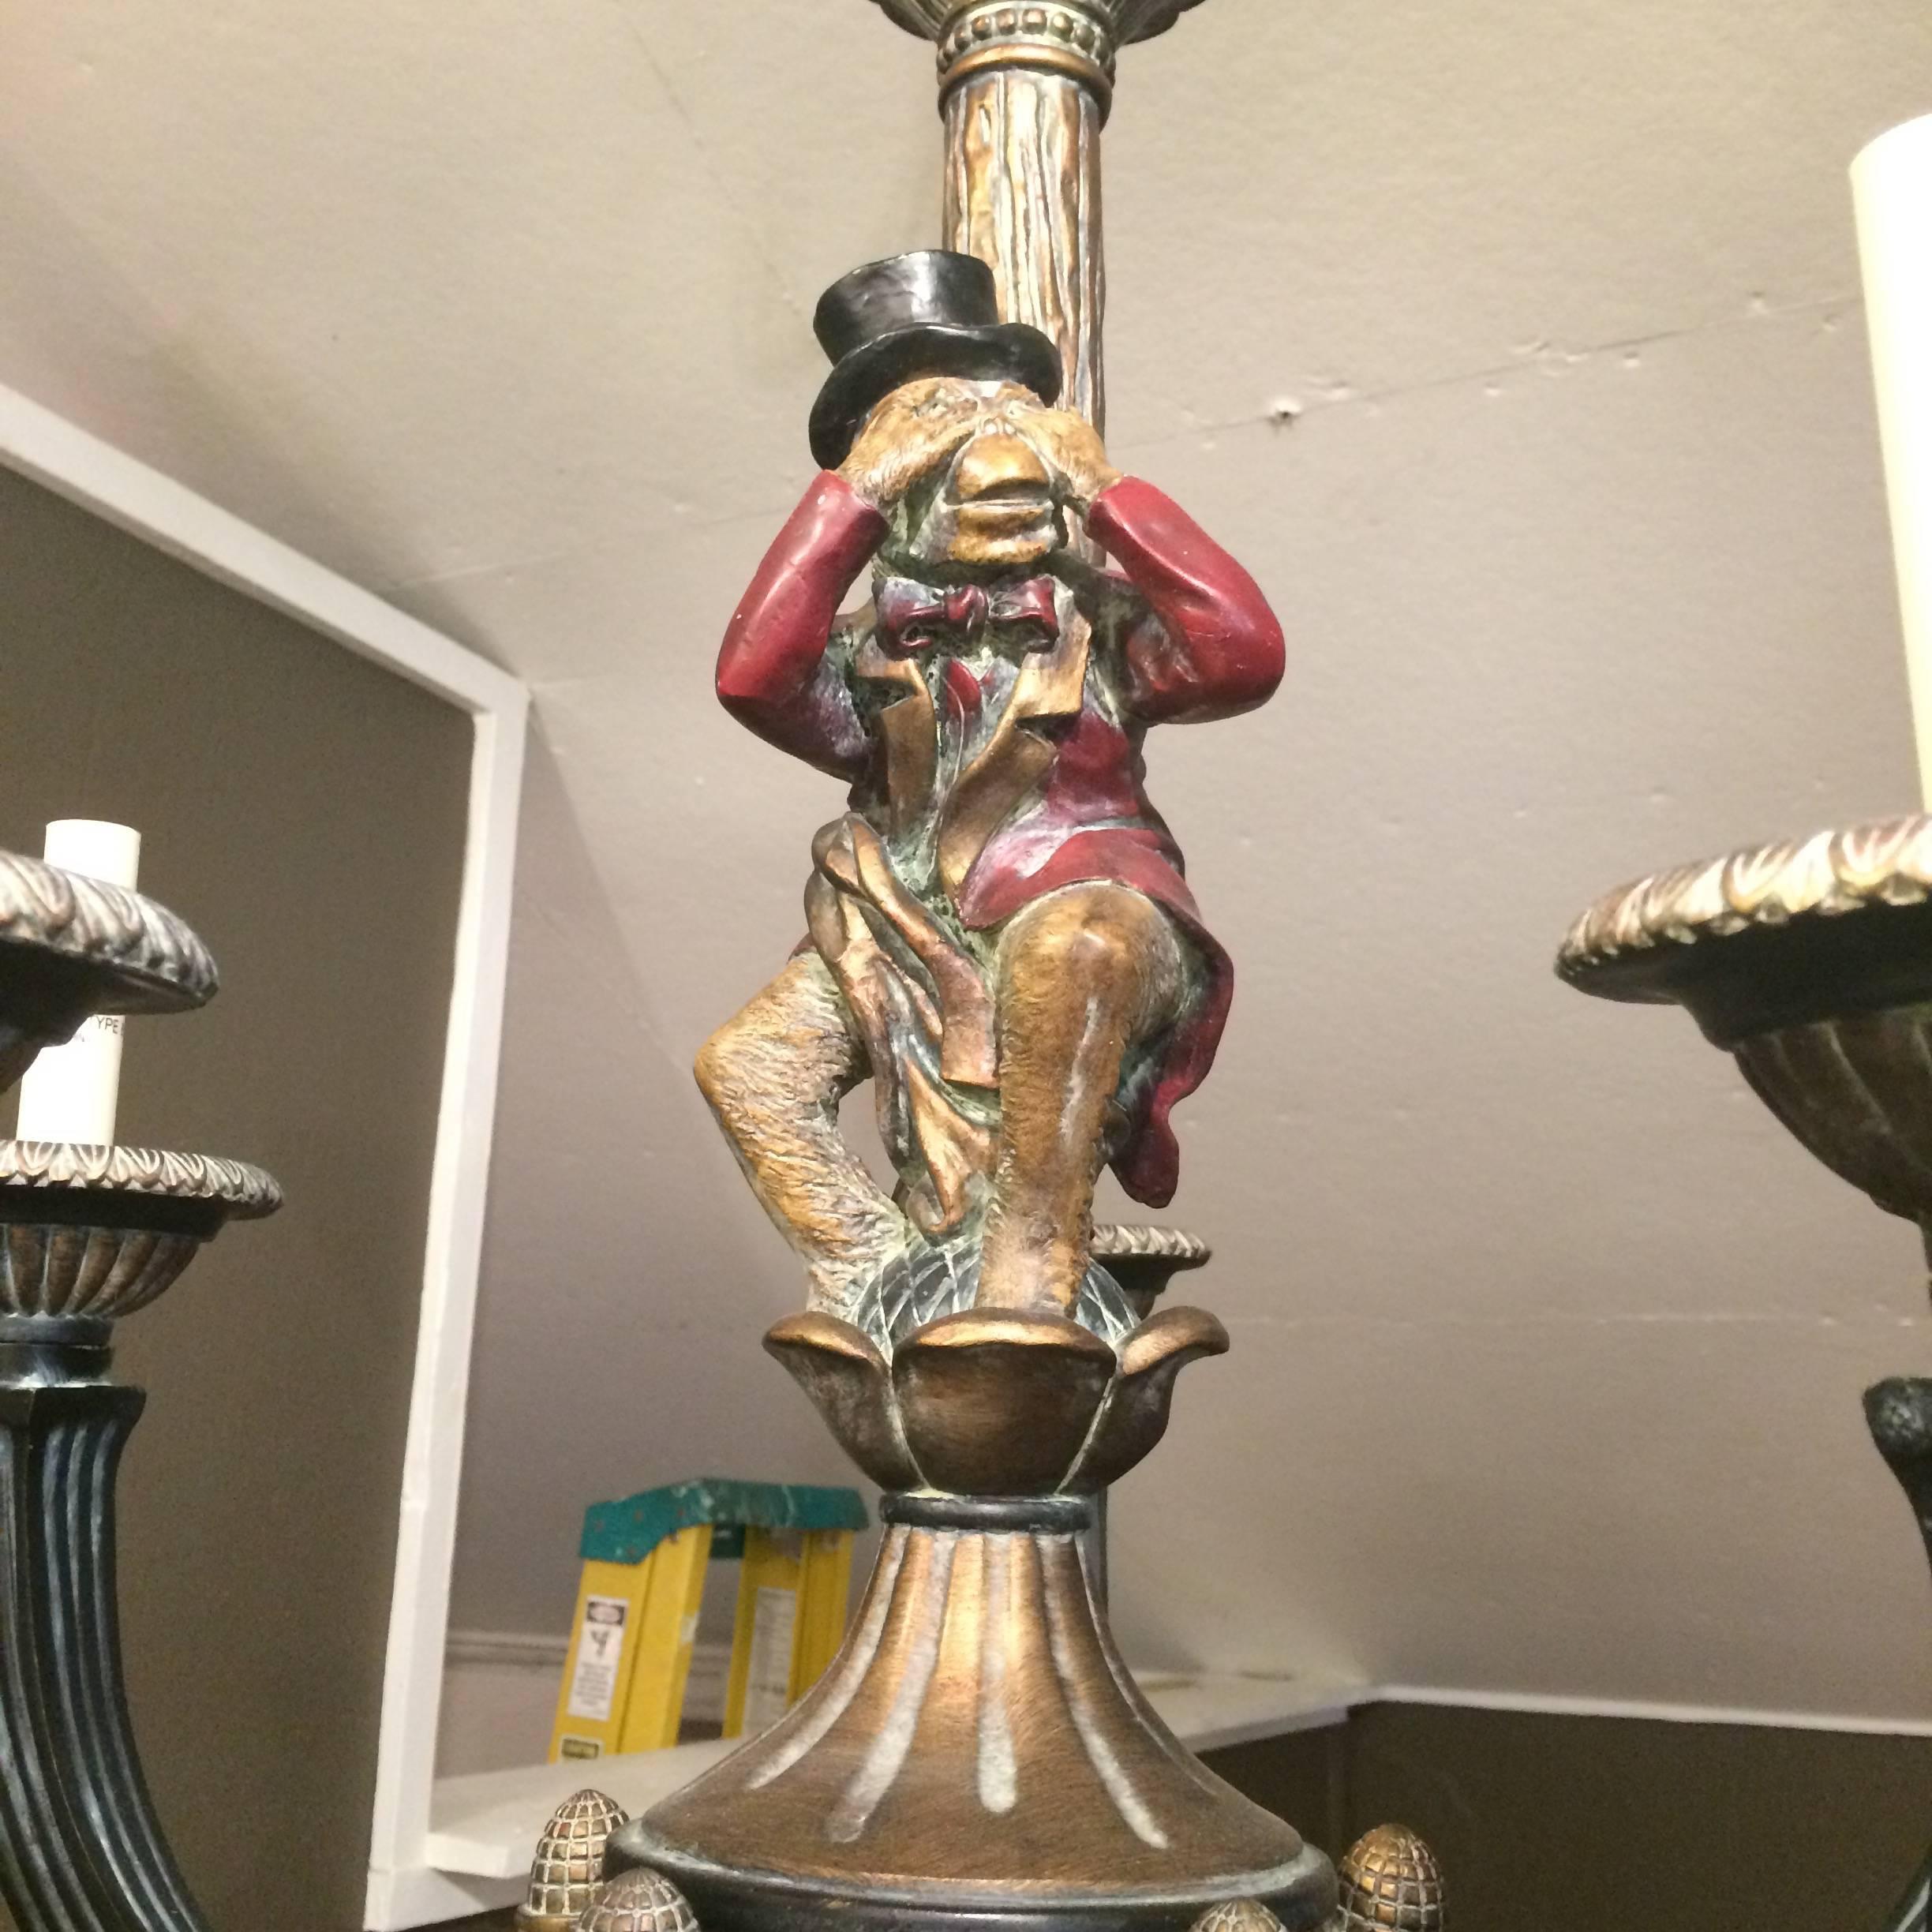 Wonderful wooden chandelier painted black, gold, and a little bit of warm red, having four arms (60 watt each) and a central adorable monkey in top hat, covering his eyes.  Comes with leopard patterned shades for each bulb.

KMc